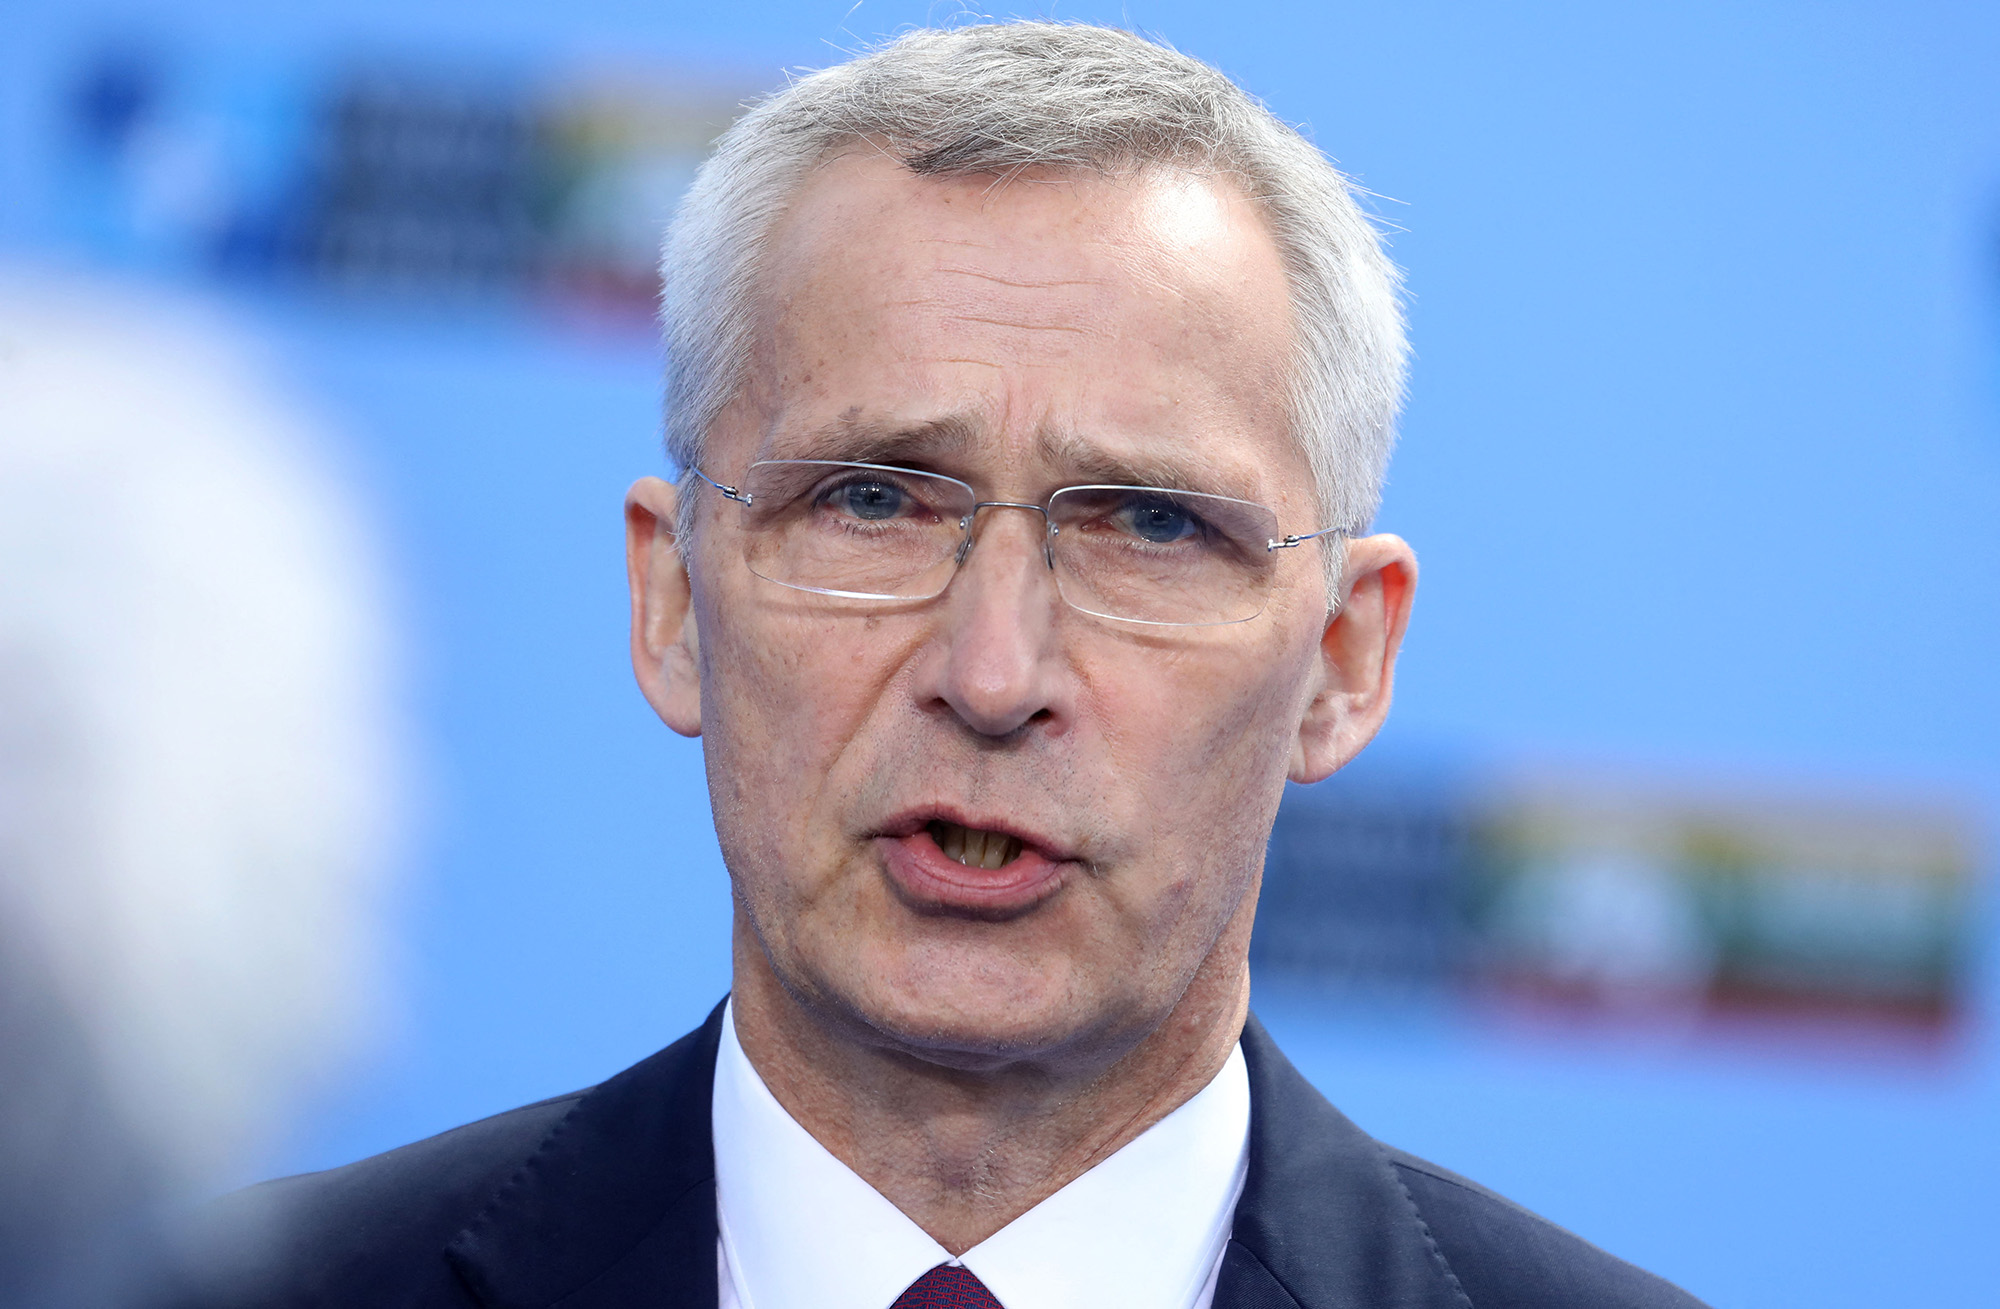 NATO Secretary General Jens Stoltenberg gives an interview prior to the official opening of the NATO Summit in Vilnius, Lithuania, on July 11.